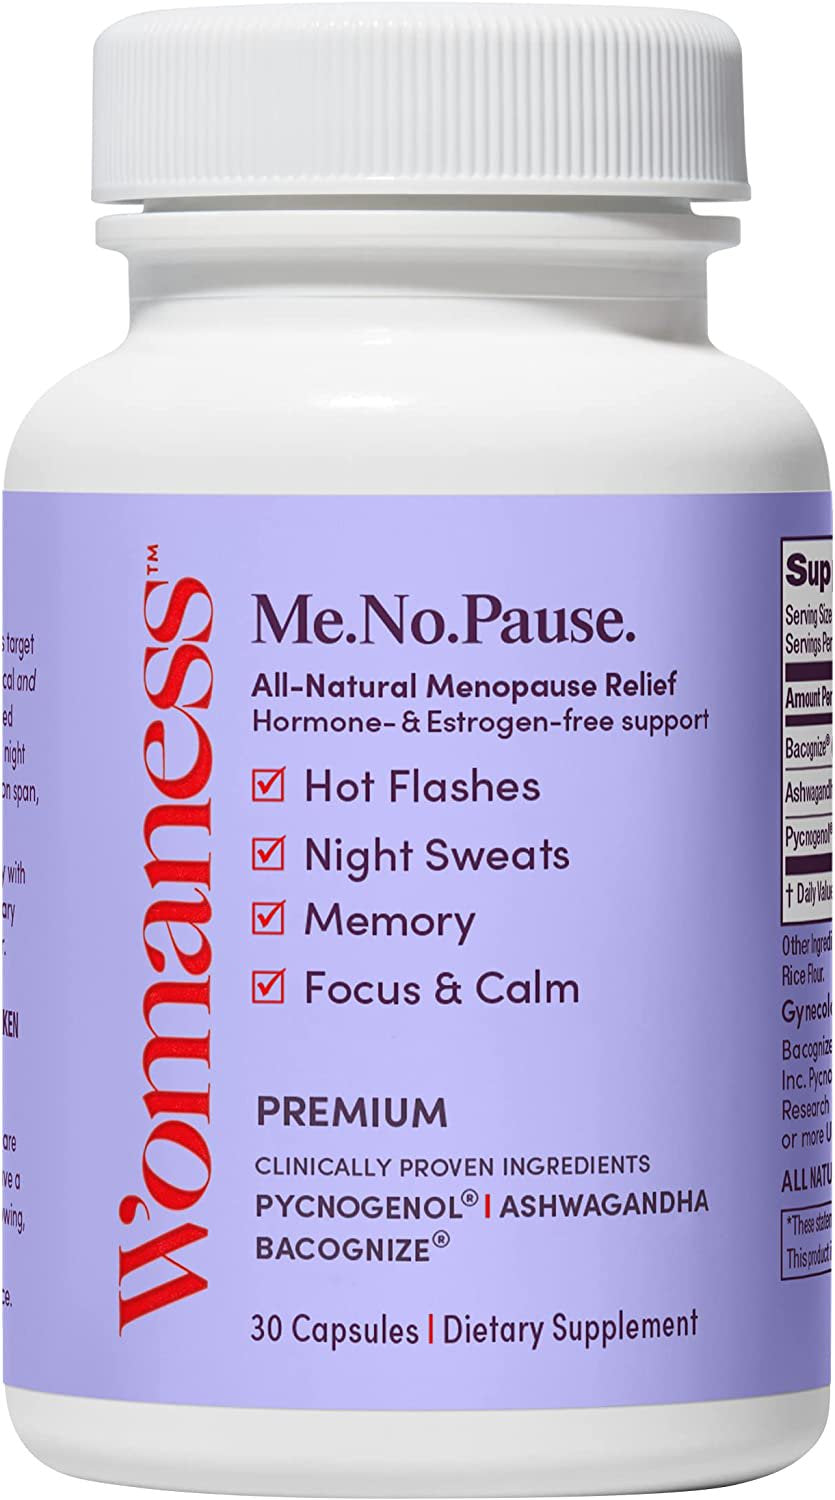 Womaness Me.No.Pause. - Menopause Support for Hot Flashes, Night Sweats, Vaginal Dryness, Memory & Mood - Perimenopause Relief & Menopause Supplements for Women - Hormone & Estrogen-Free (30 Capsules)